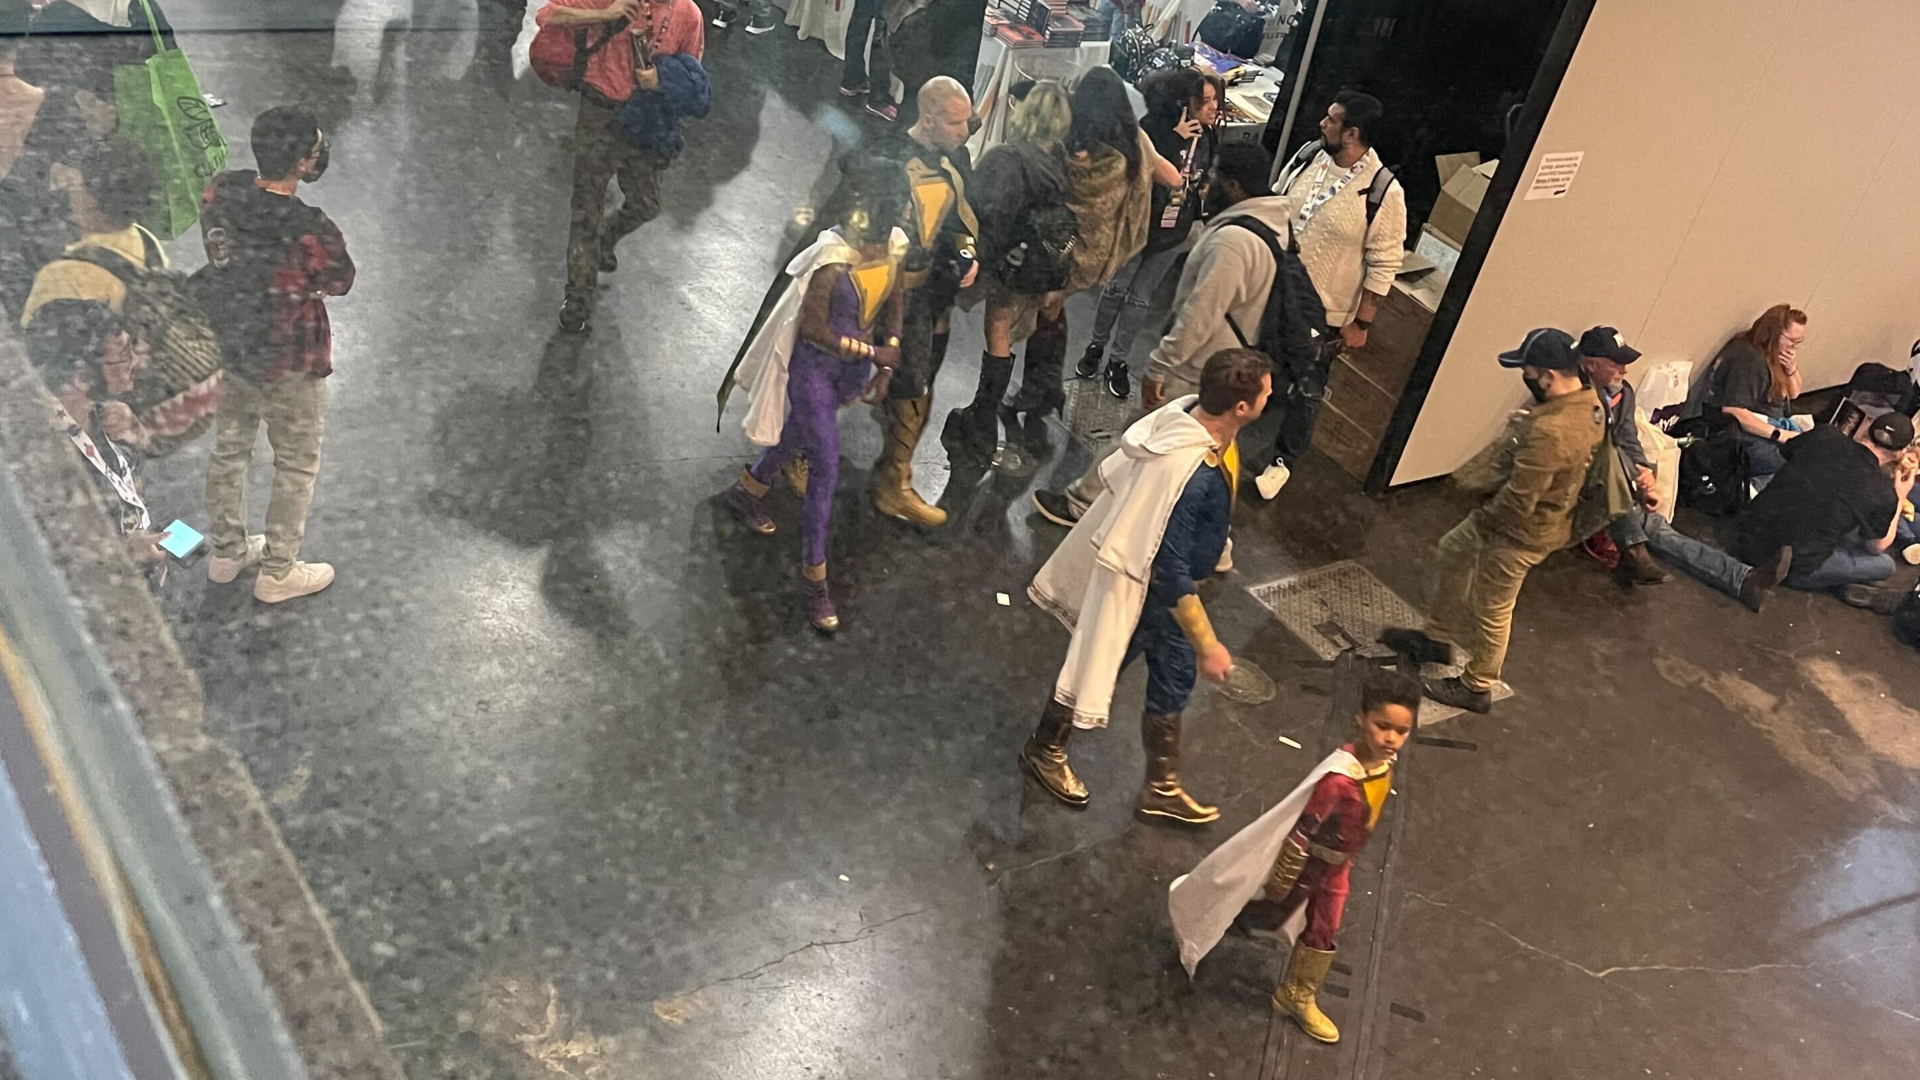 Group dressed as members of the “Shazam Family” at the New York Comic Con, October 8